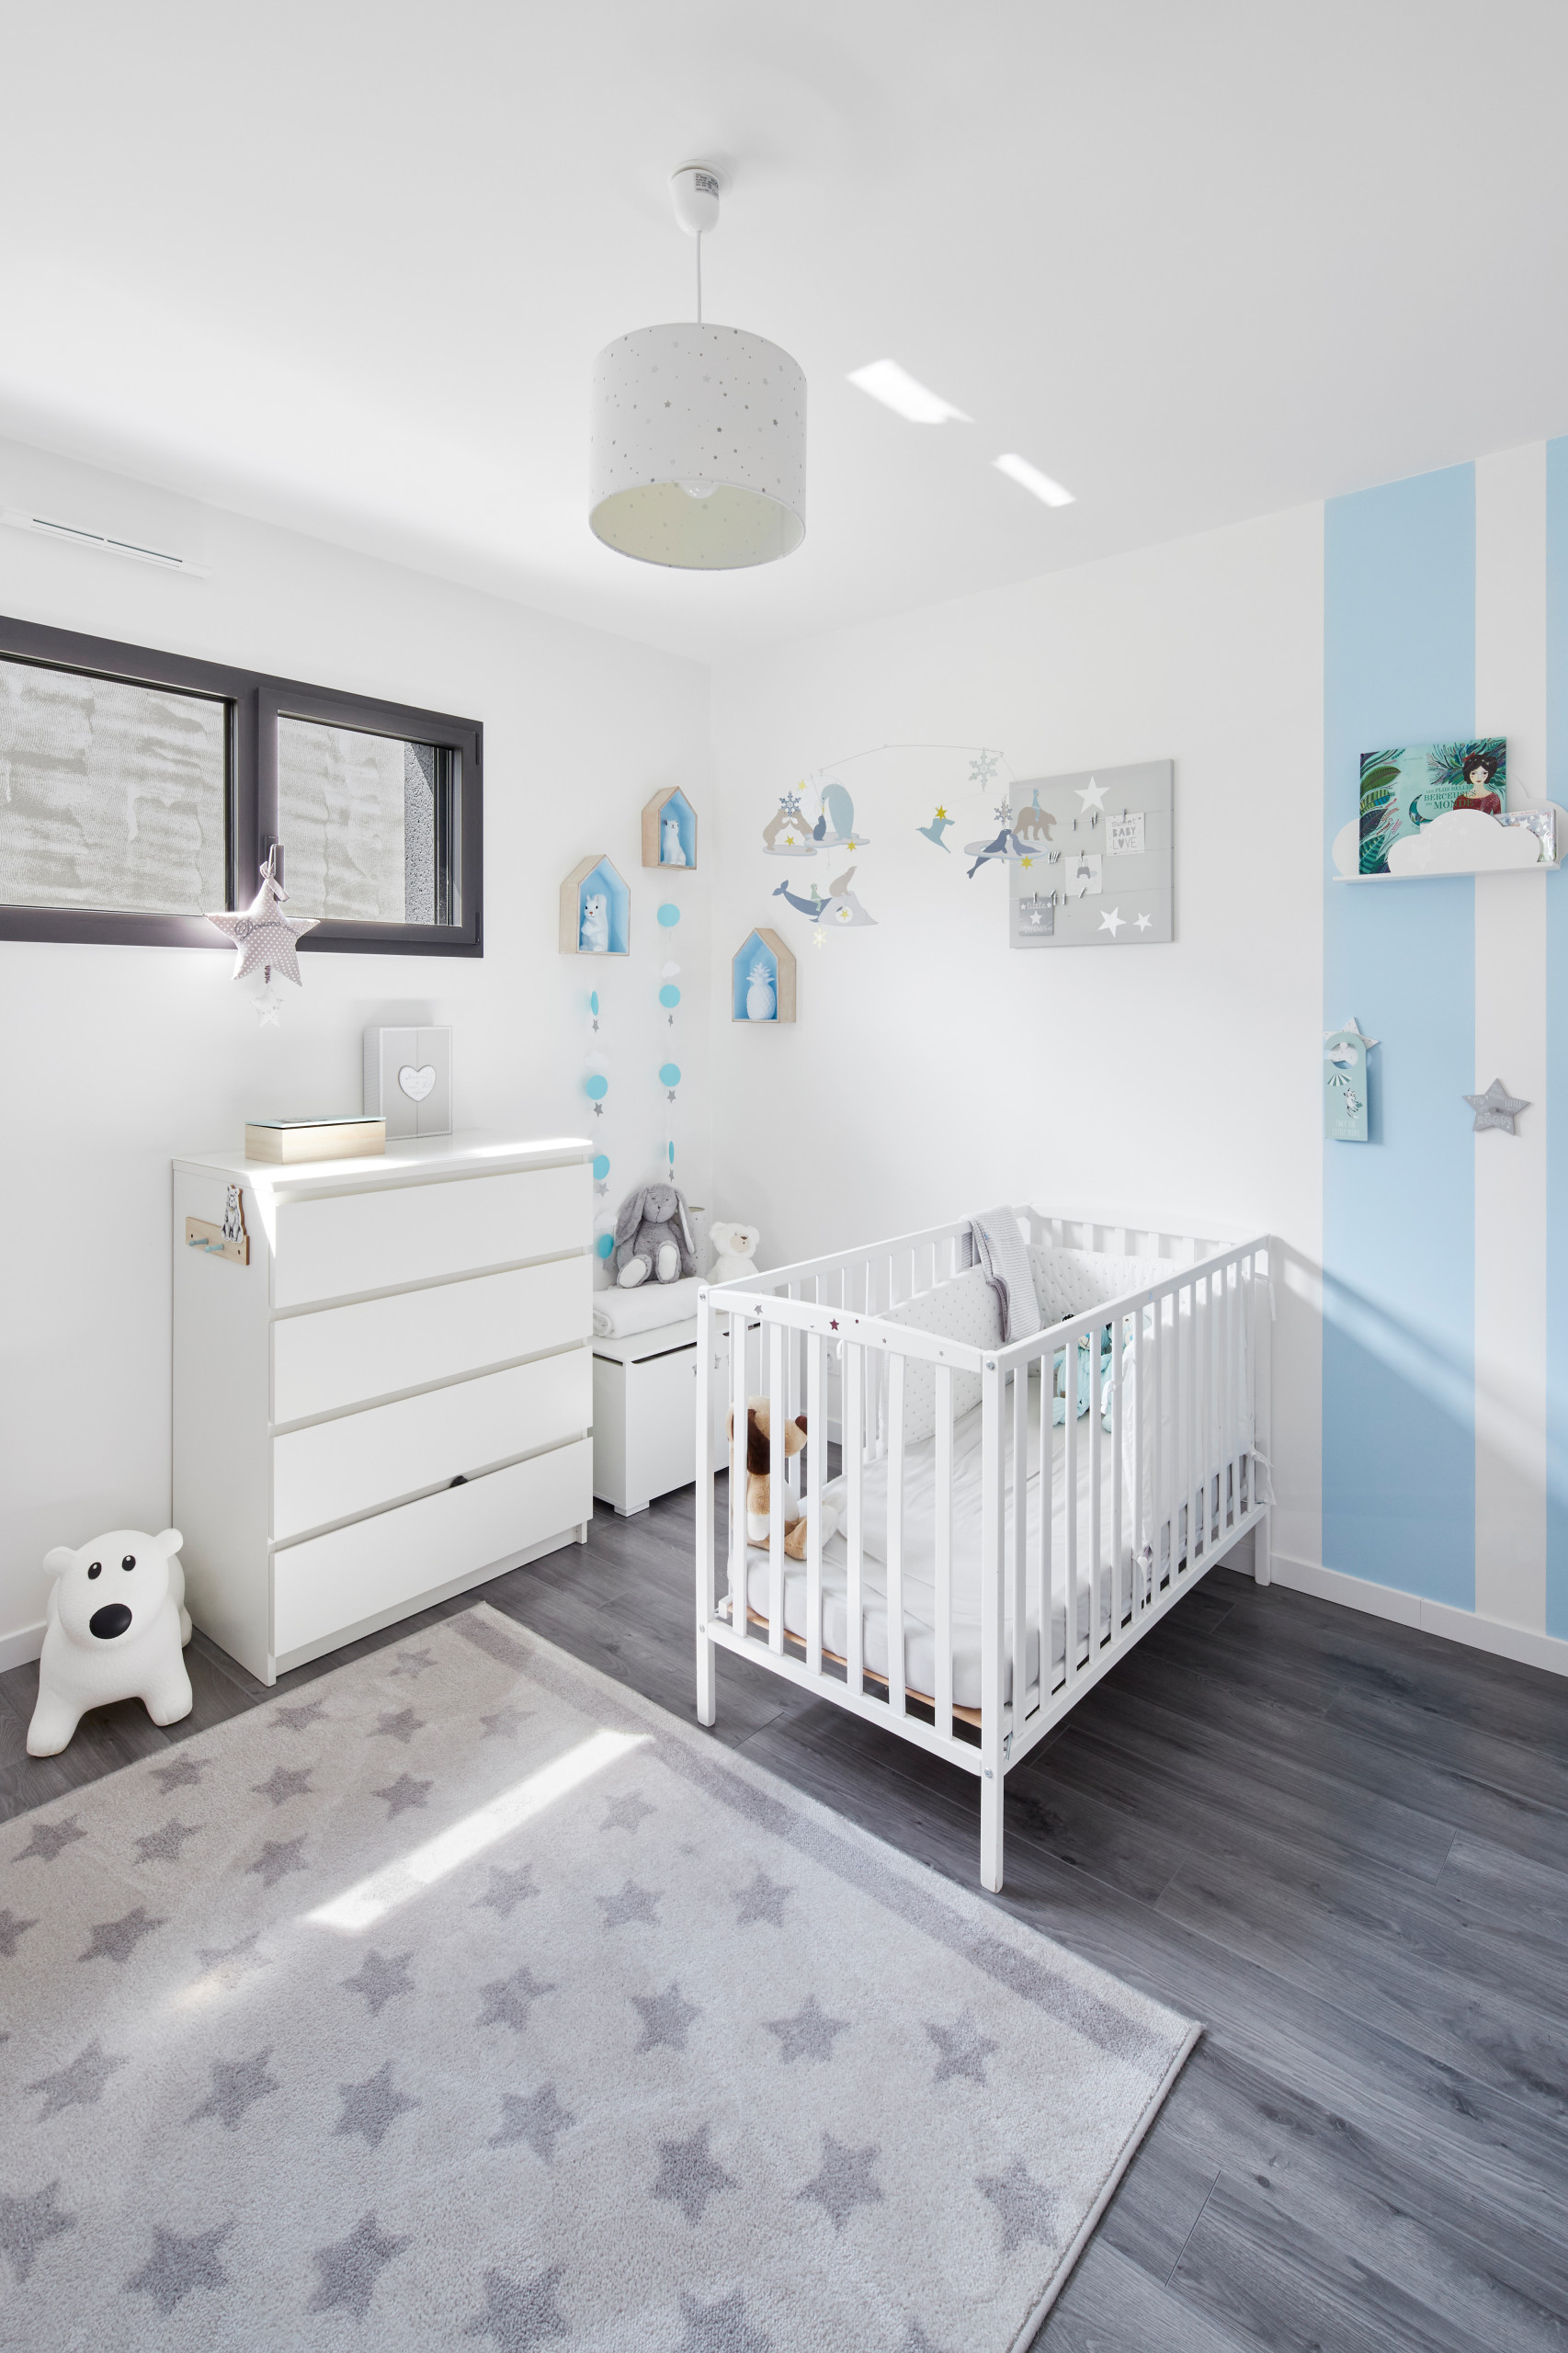 75 Most Popular 75 Beautiful White Kids Room And Nursery With Laminate Floors Ideas And Designs Design Ideas For February 22 Houzz Ie